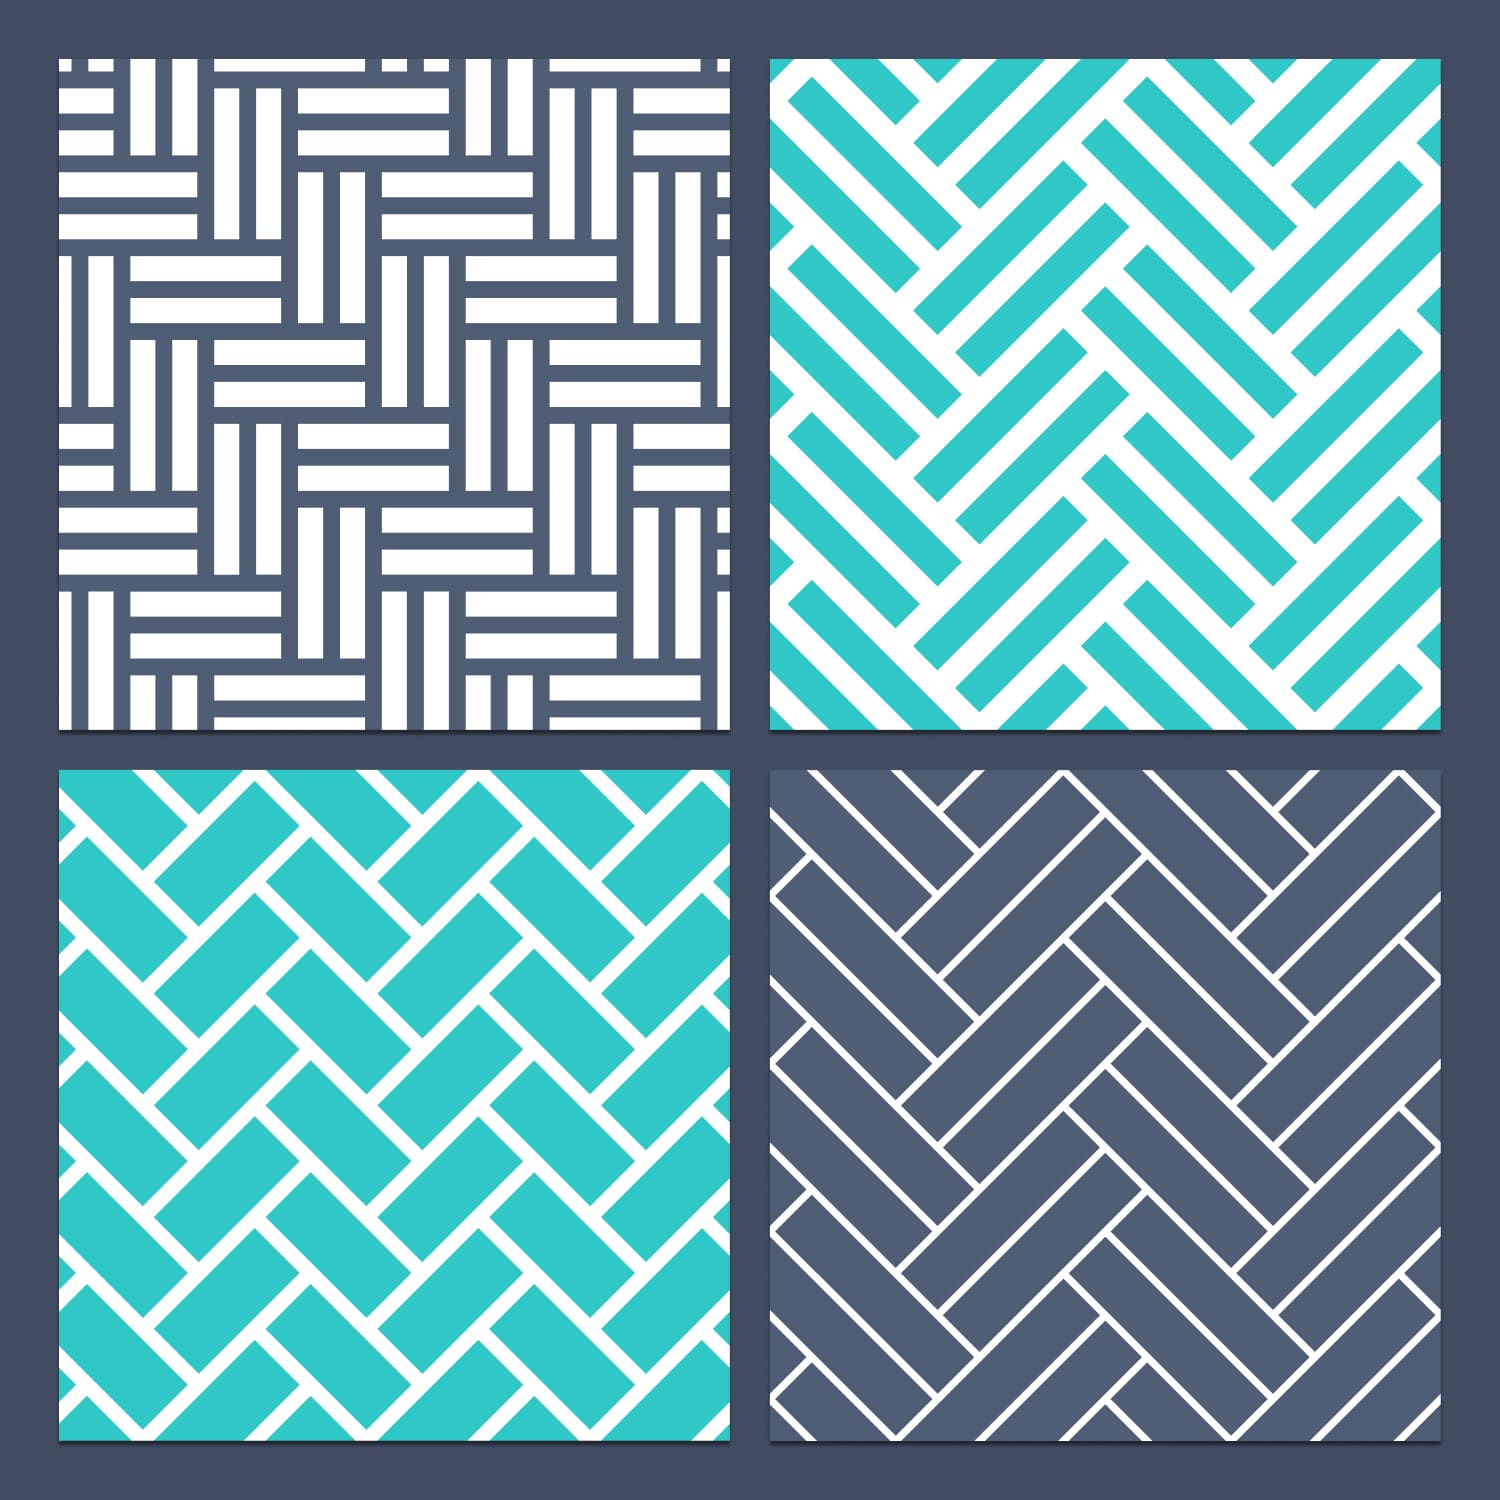 turquoise Chevron Patterns cover.